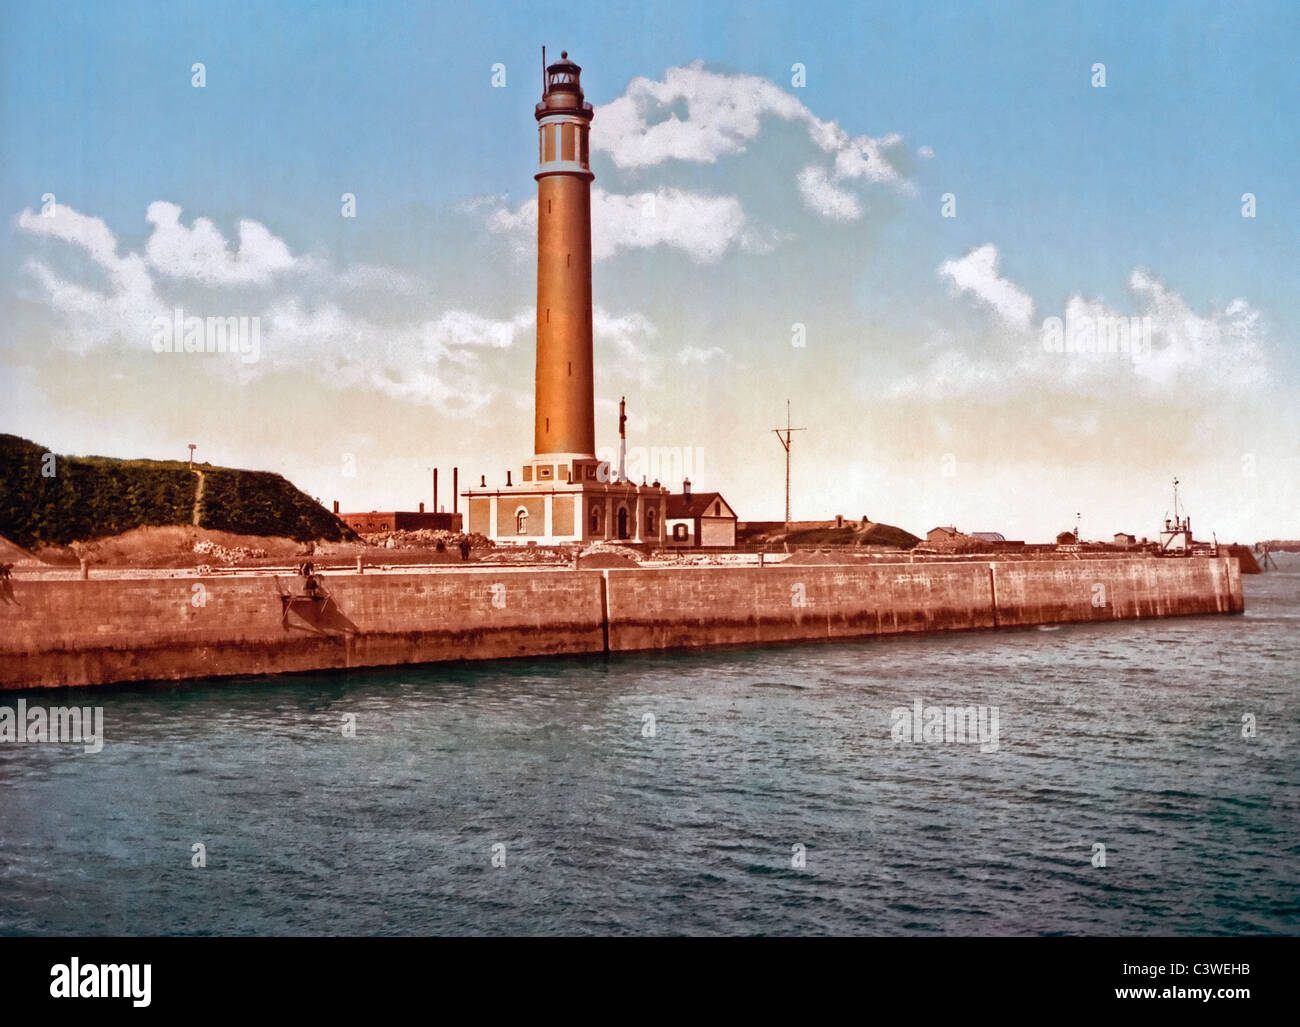 Le phare - Dunkerque, France, vers 1900 Banque D'Images